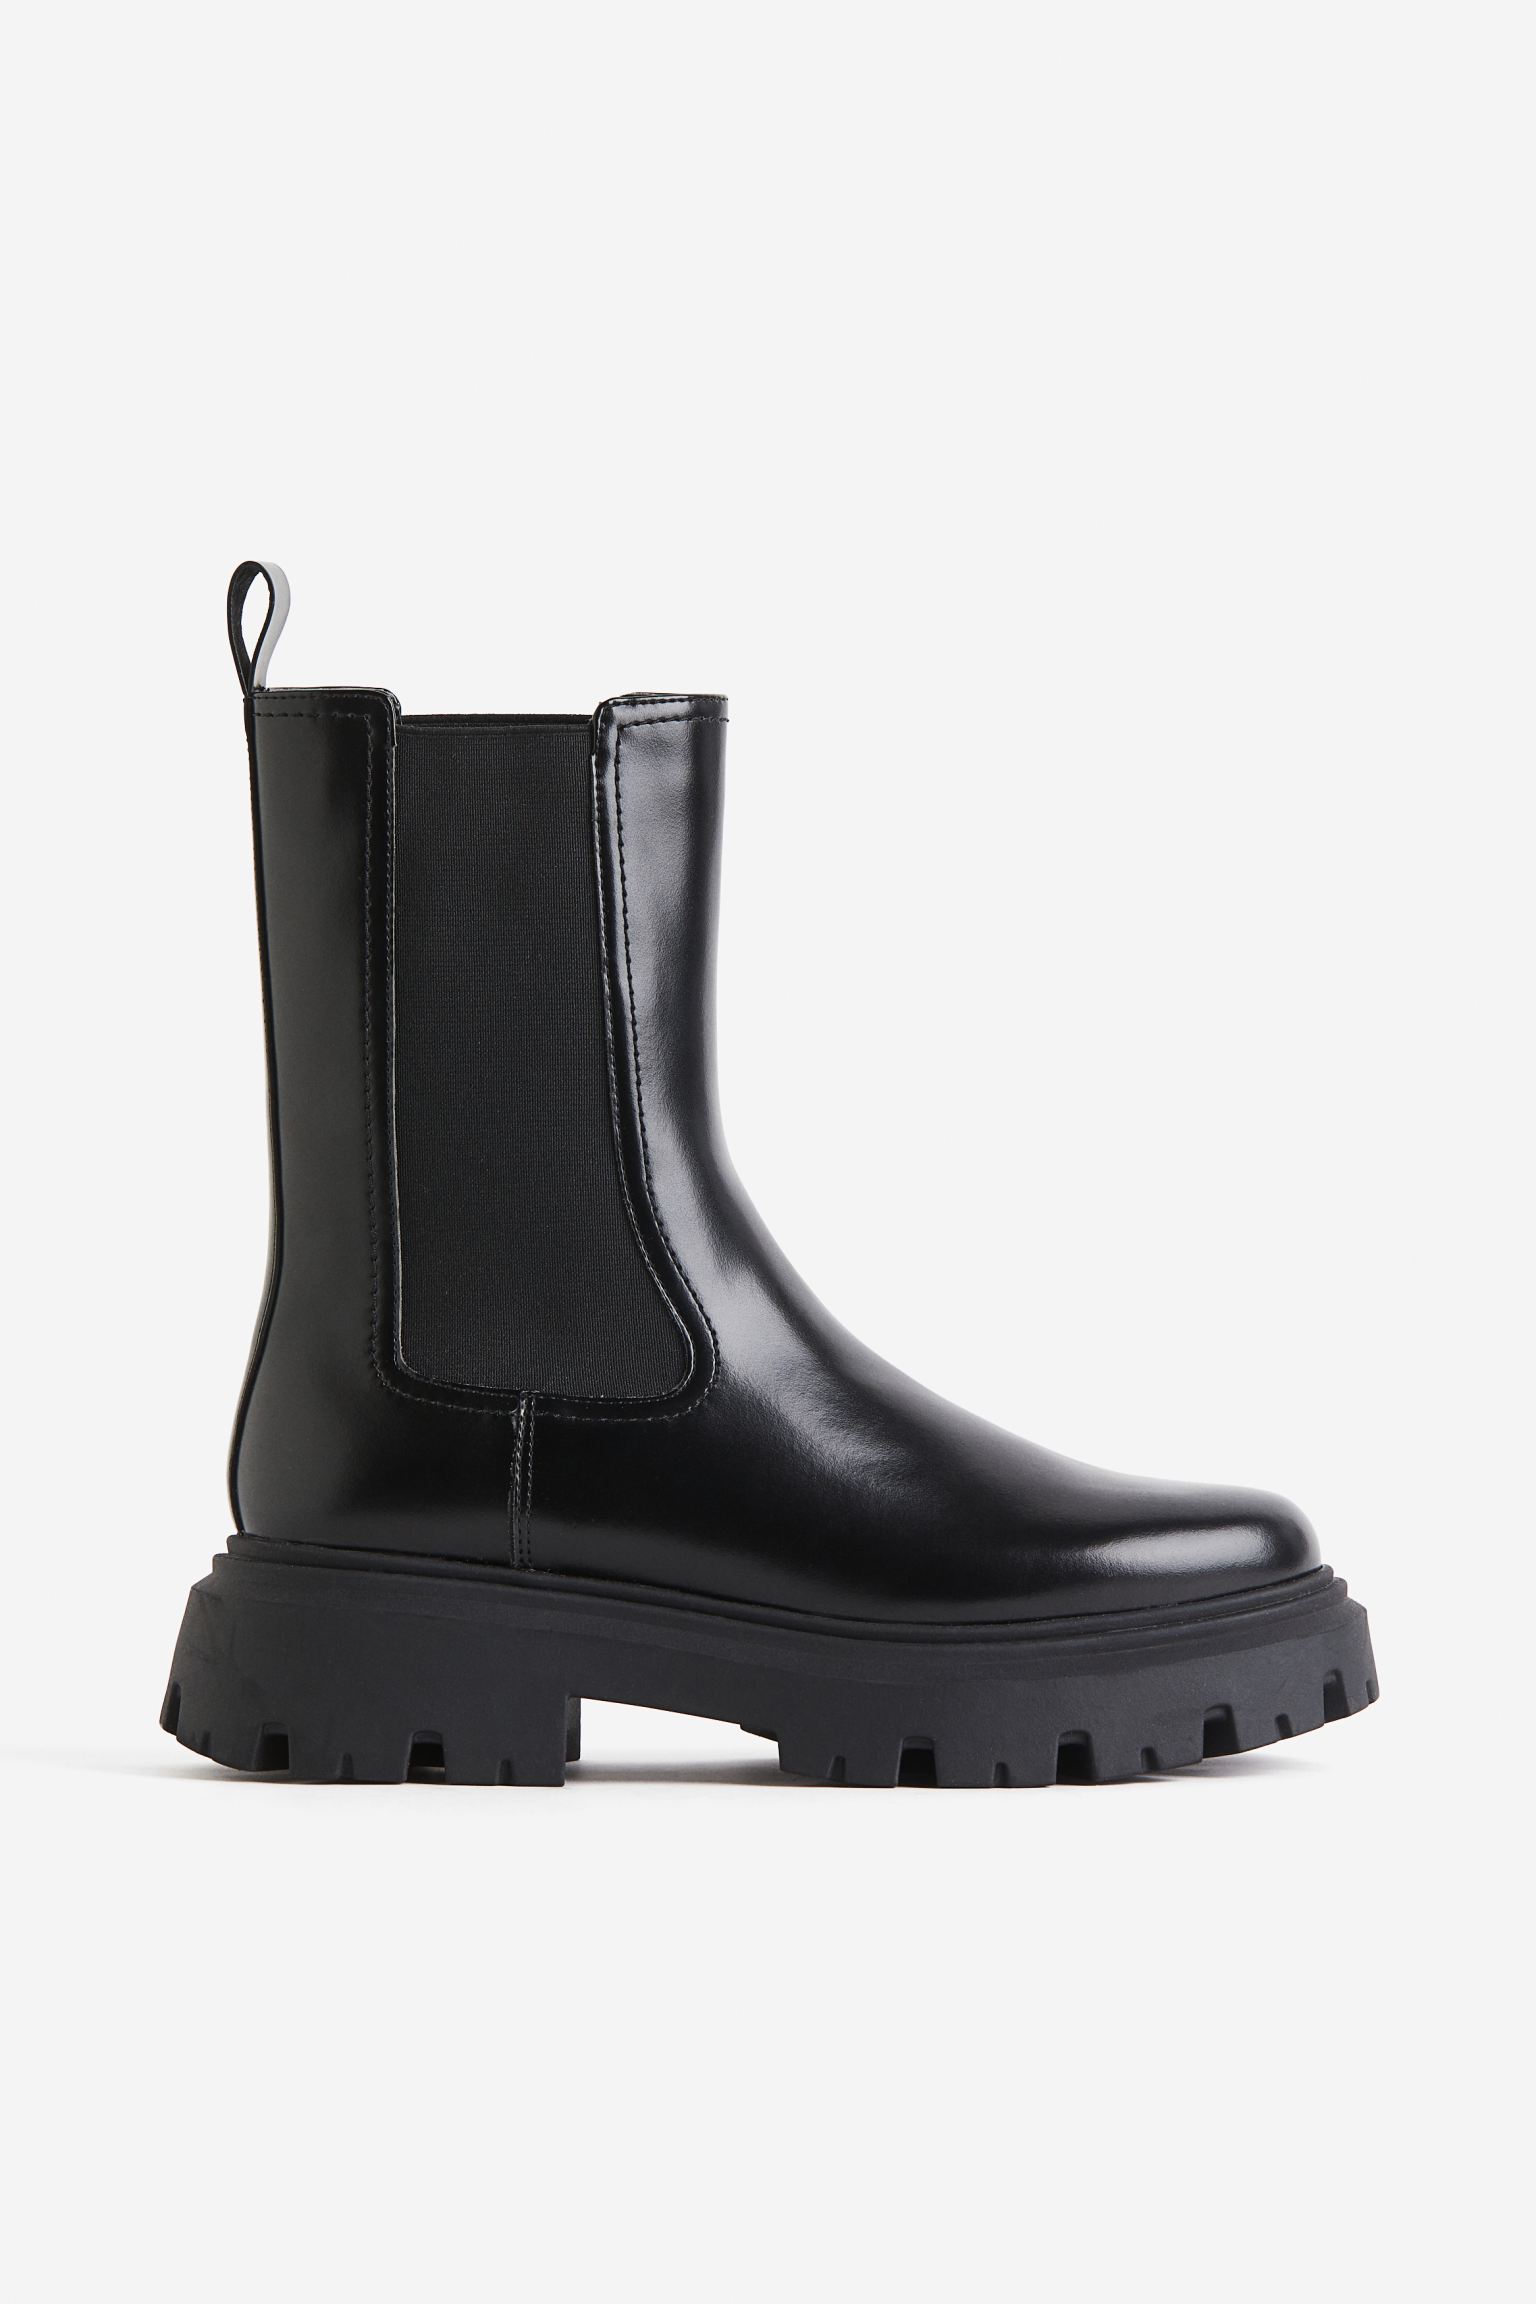 H&M + Tubby Chelsea Boots